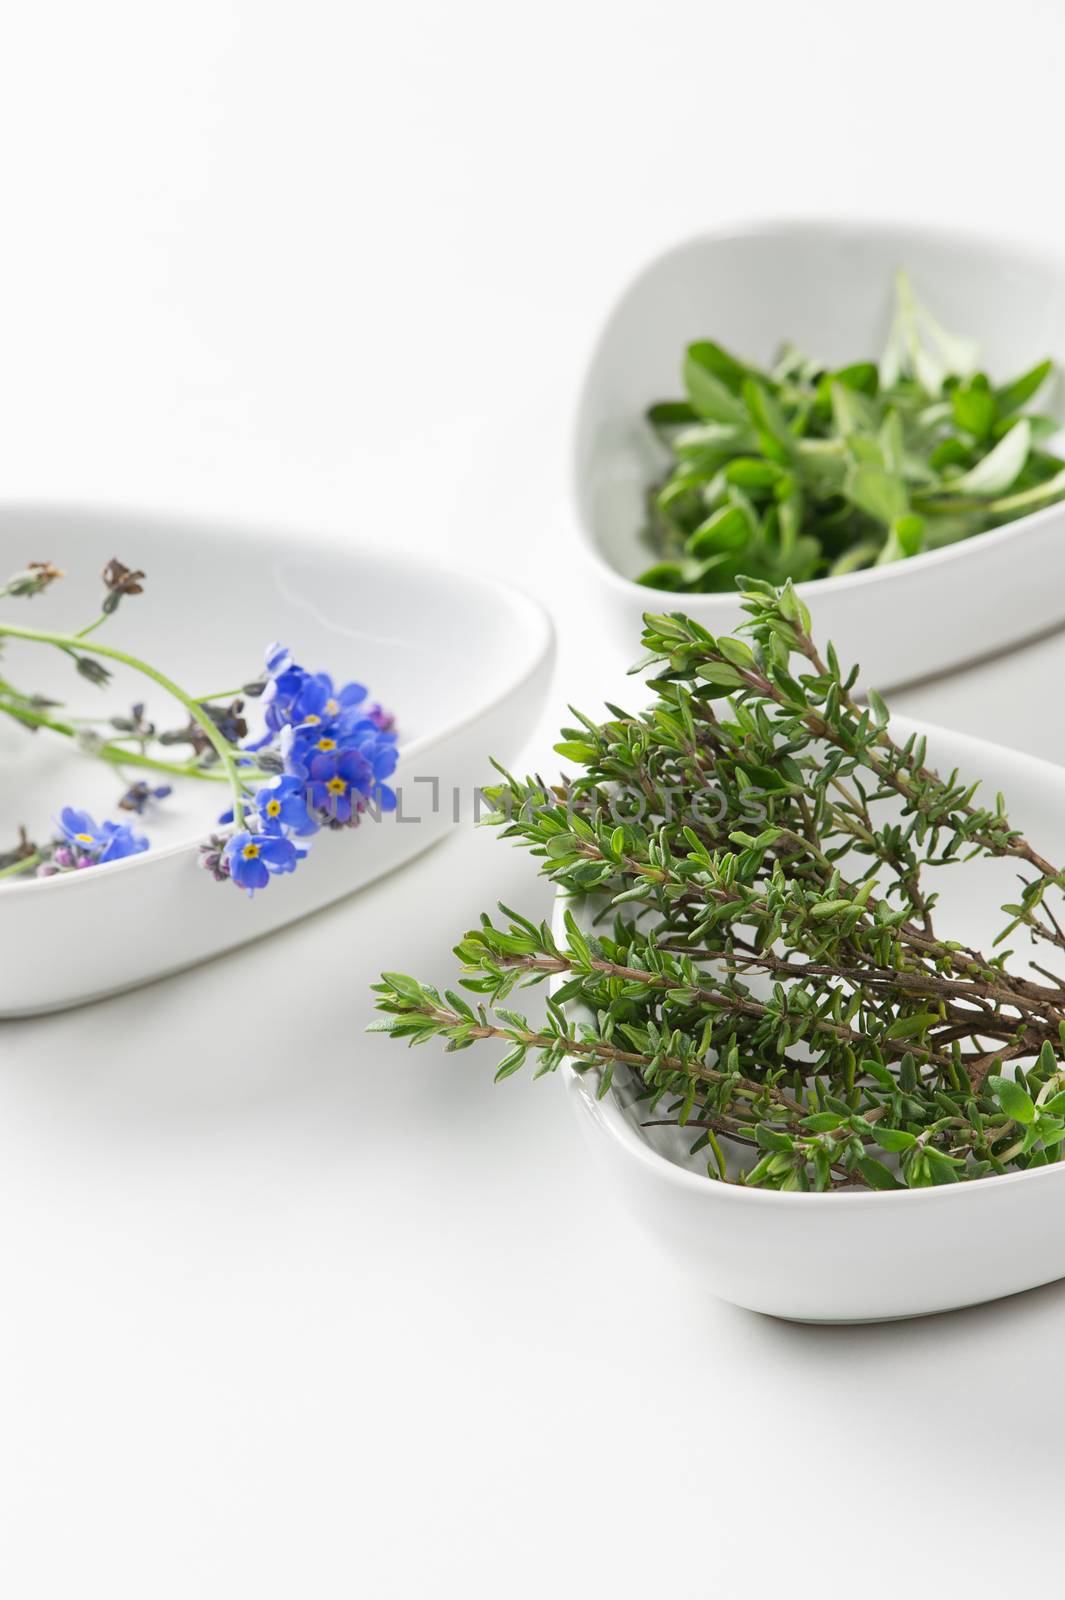 Assorted edible flowers and herbs in individual dishes with focus to springs of fresh rosemary , an aromatic pungent herb used in cooking to flavor meat dishes